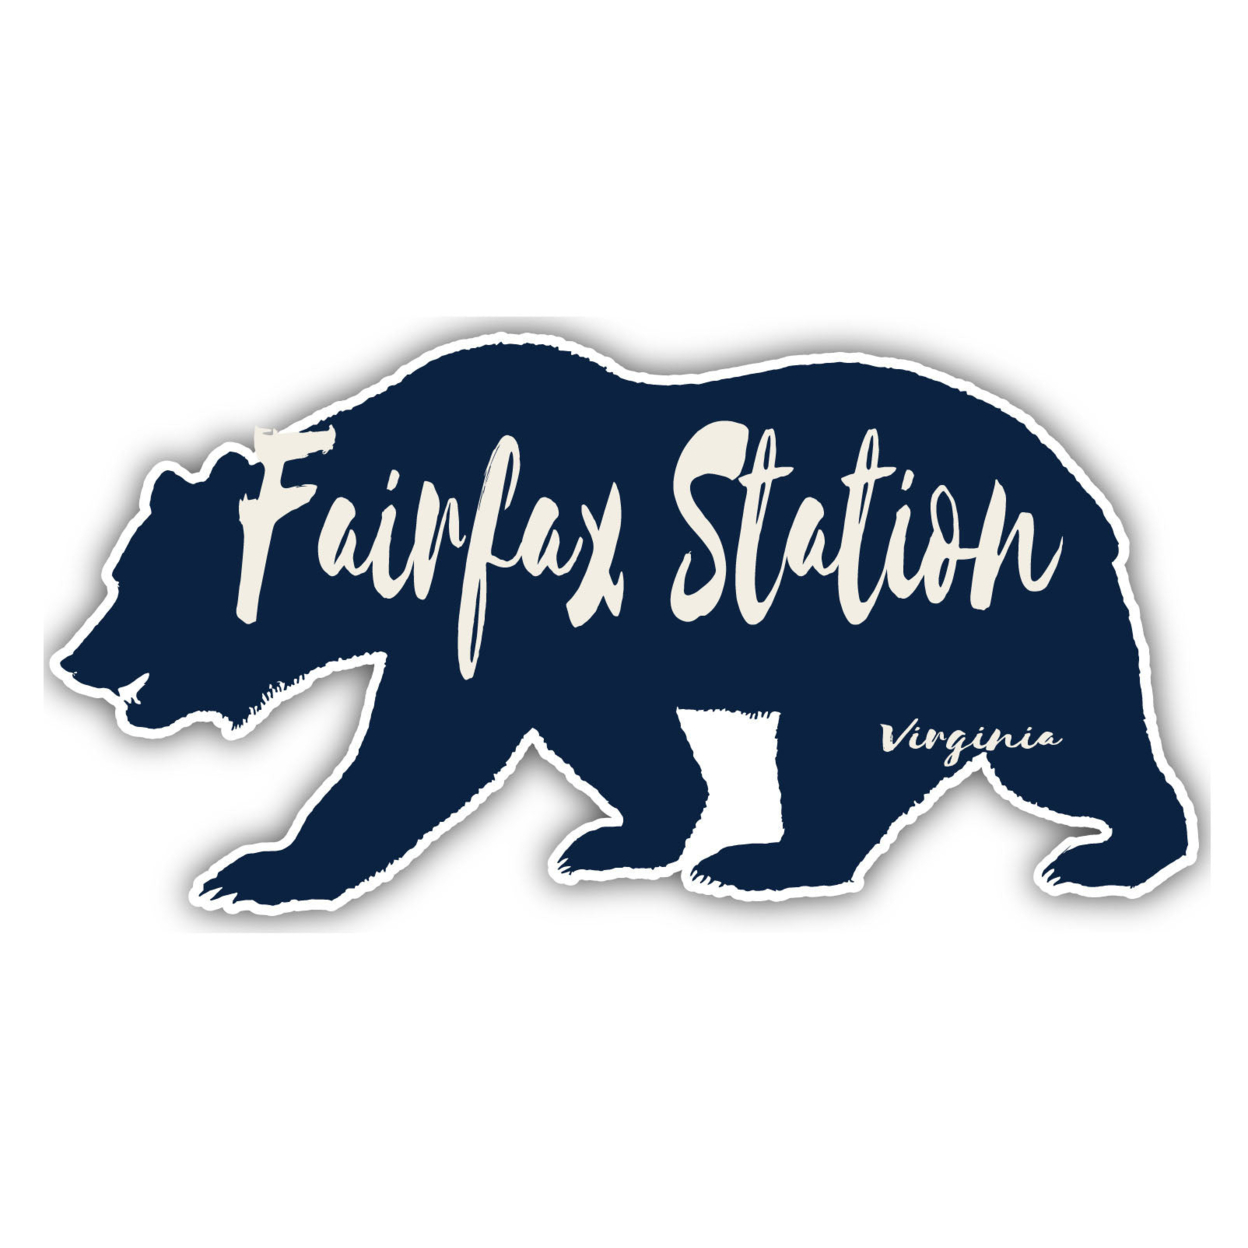 Fairfax Station Virginia Souvenir Decorative Stickers (Choose Theme And Size) - Single Unit, 2-Inch, Great Outdoors